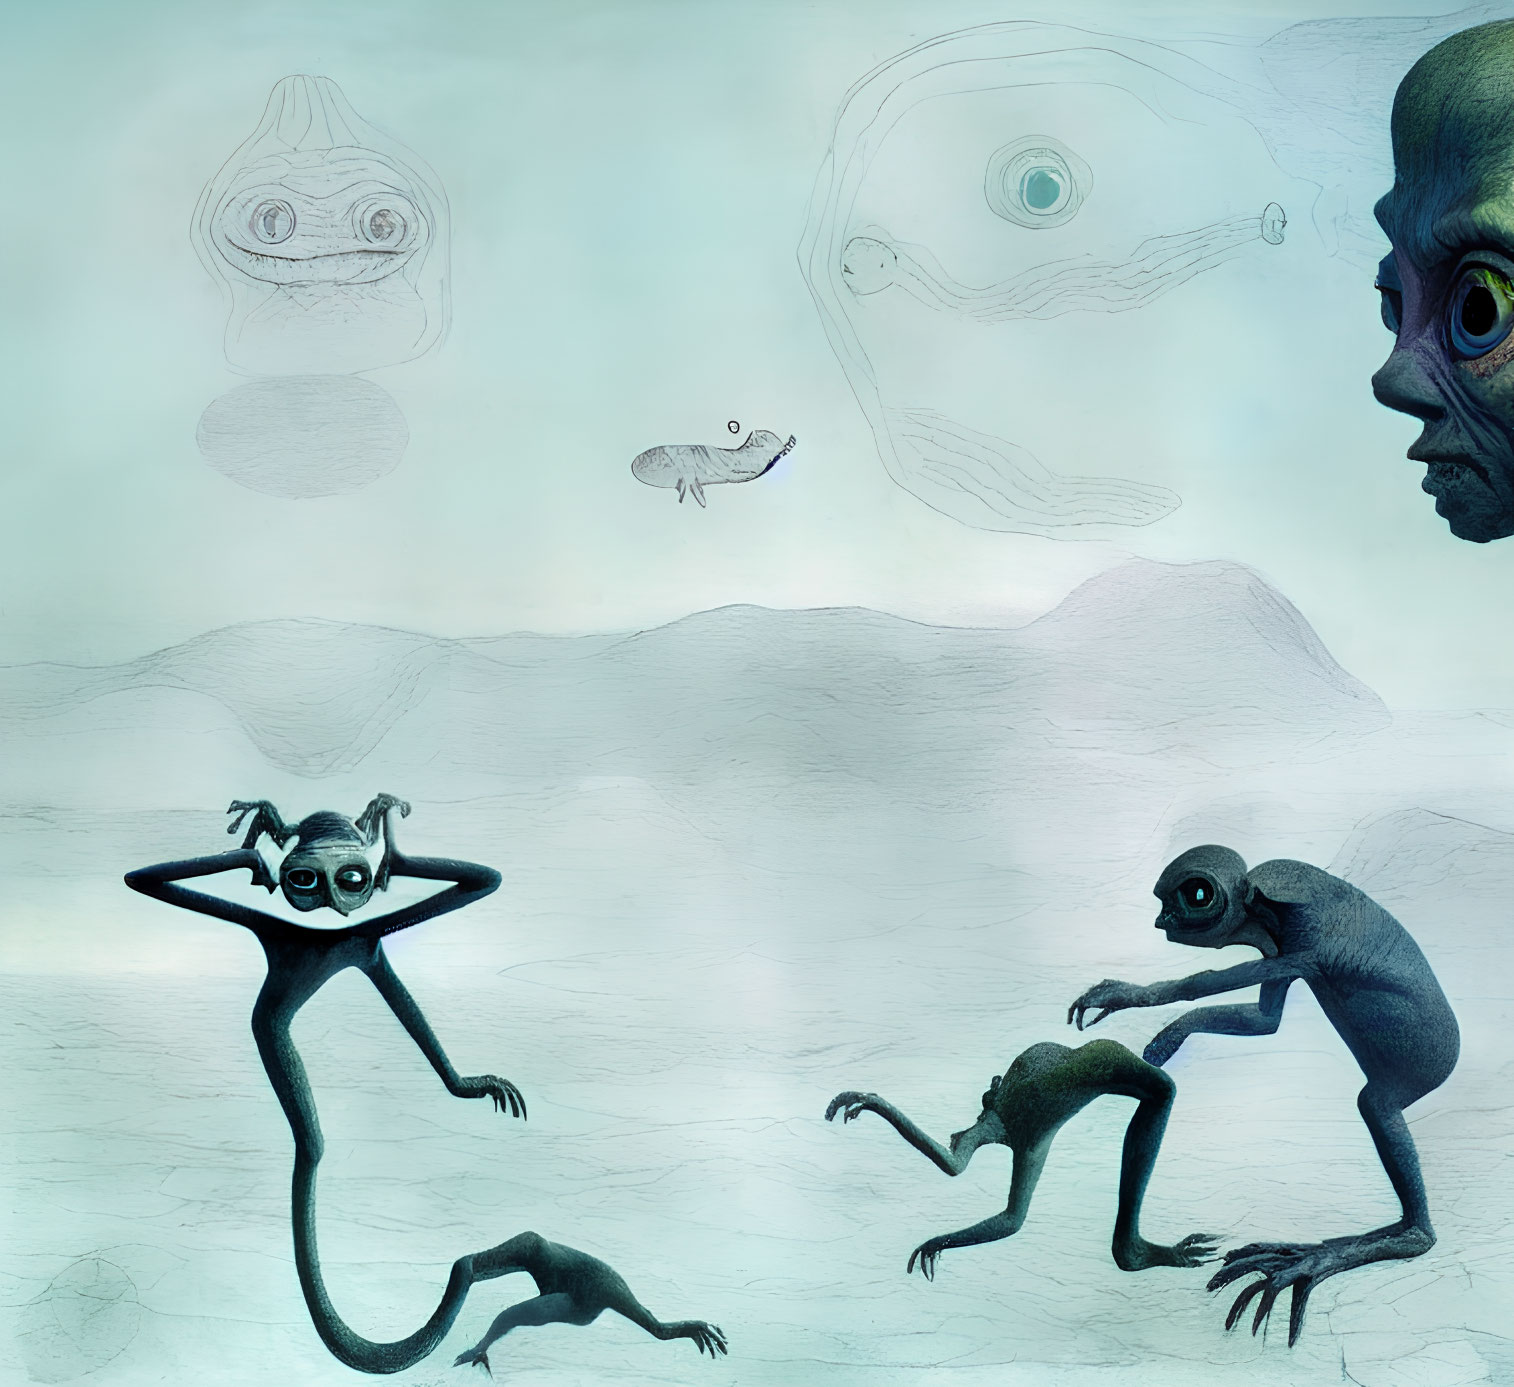 Surreal artwork featuring alien creatures in icy landscape